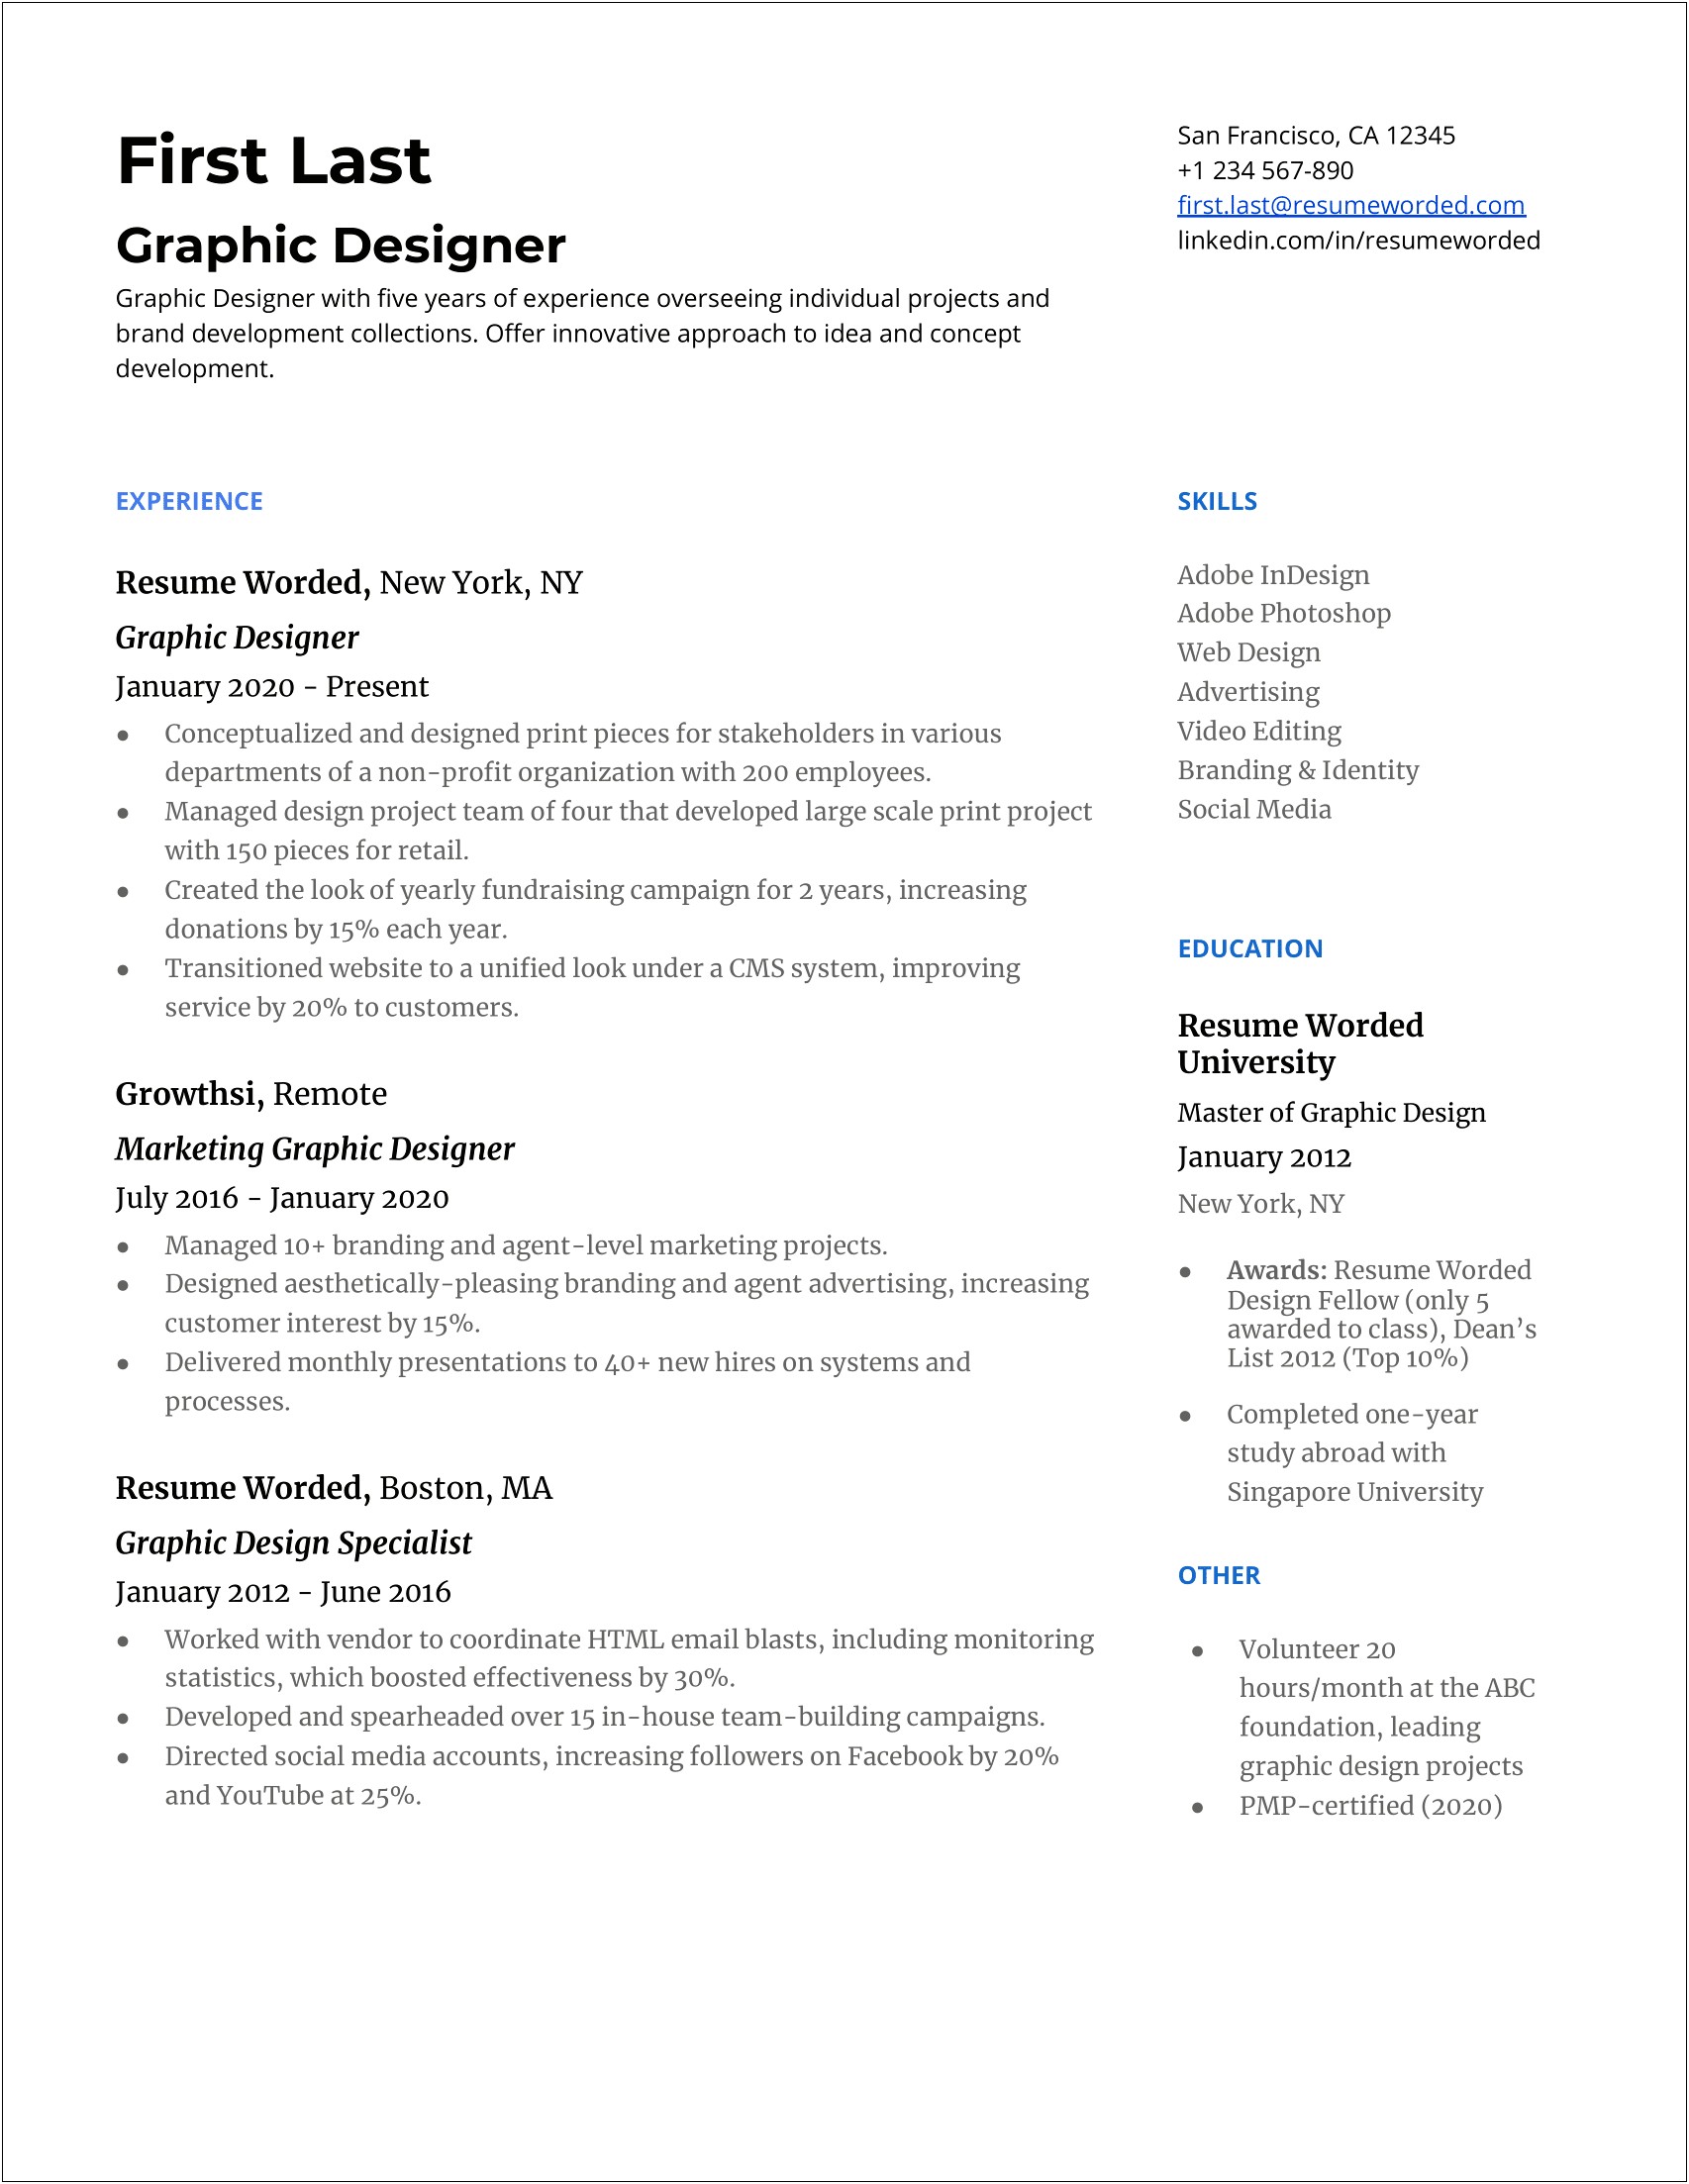 Resume Objective Examples For Graphic Designer